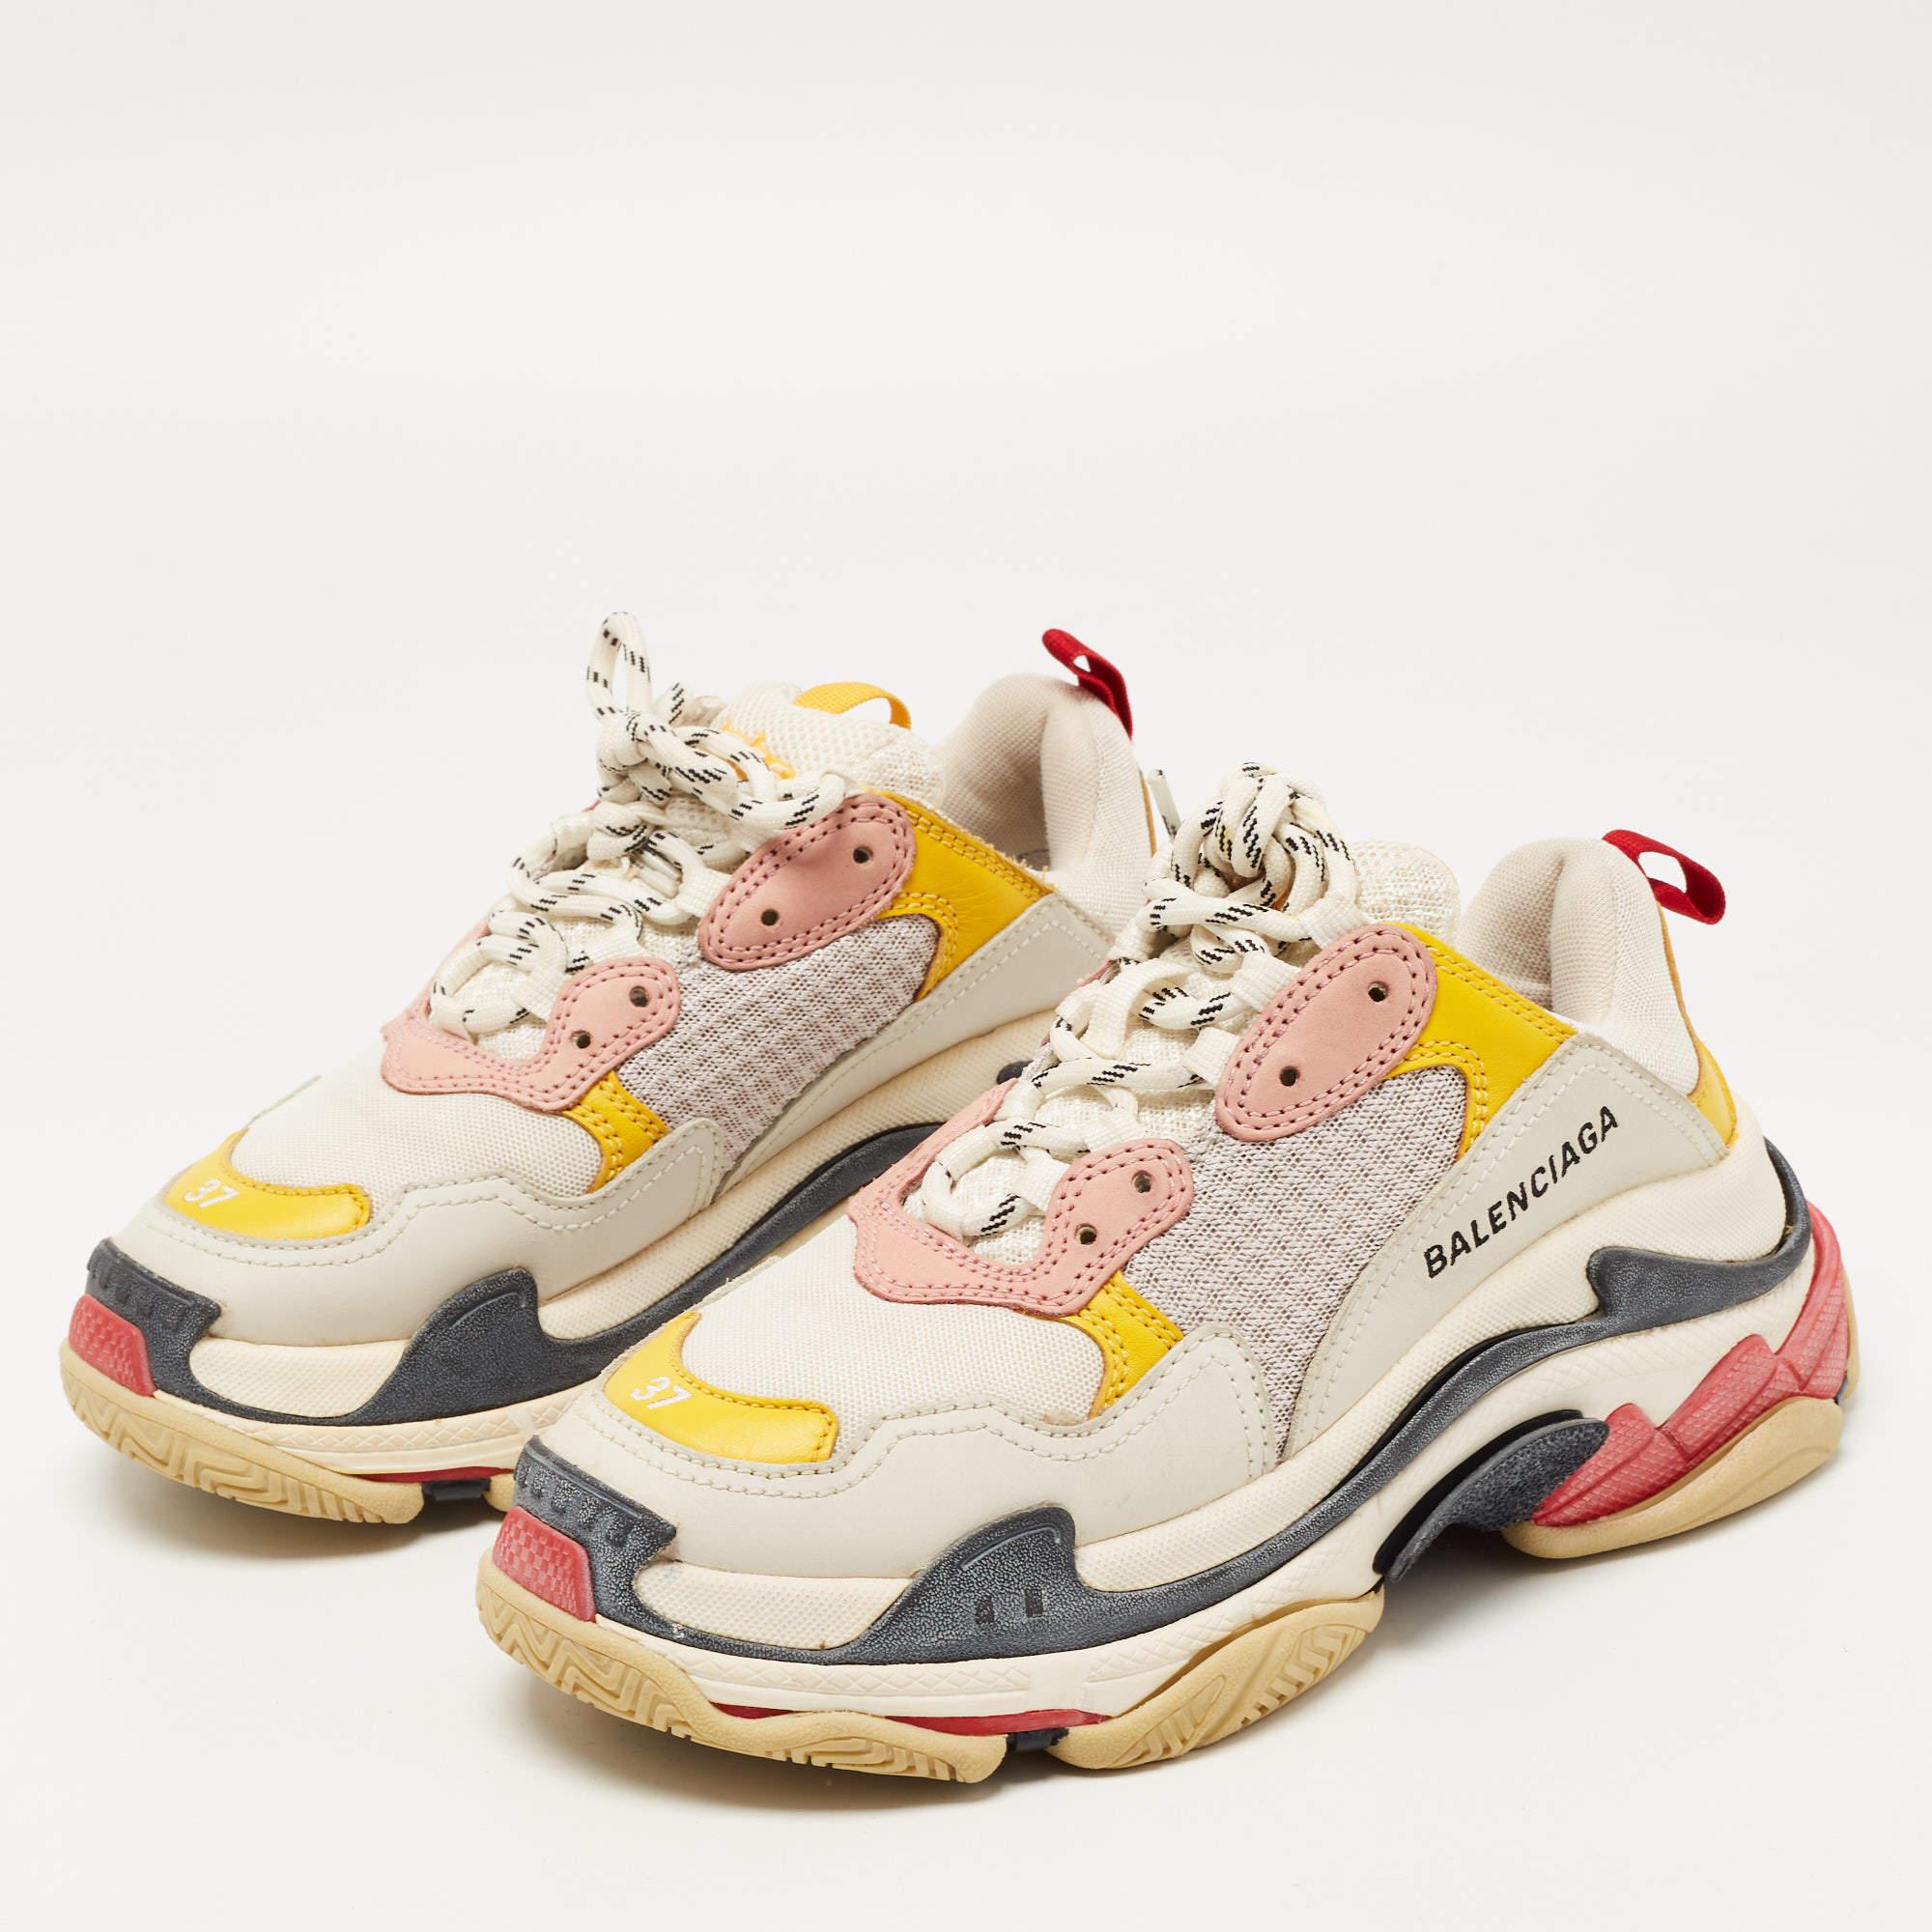 Women's Balenciaga Multicolor Mesh and Leather Triple S Sneakers Size 37